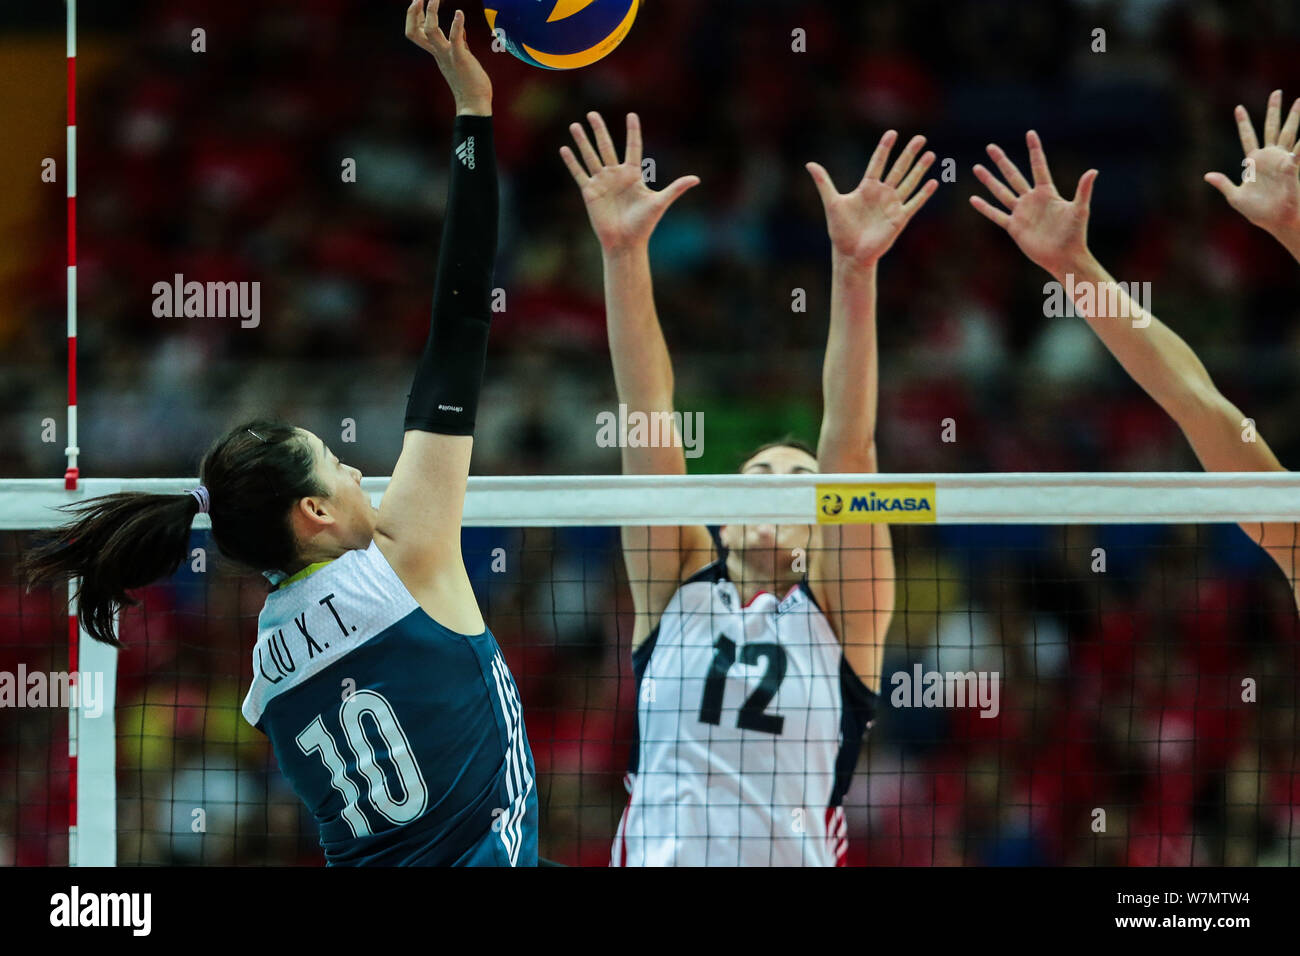 Liu Xiaotong of China, front, spikes against Kelly Murphy of the United States during the Pool B1-Group 1 match of the FIVB World Grand Prix 2017 in K Stock Photo